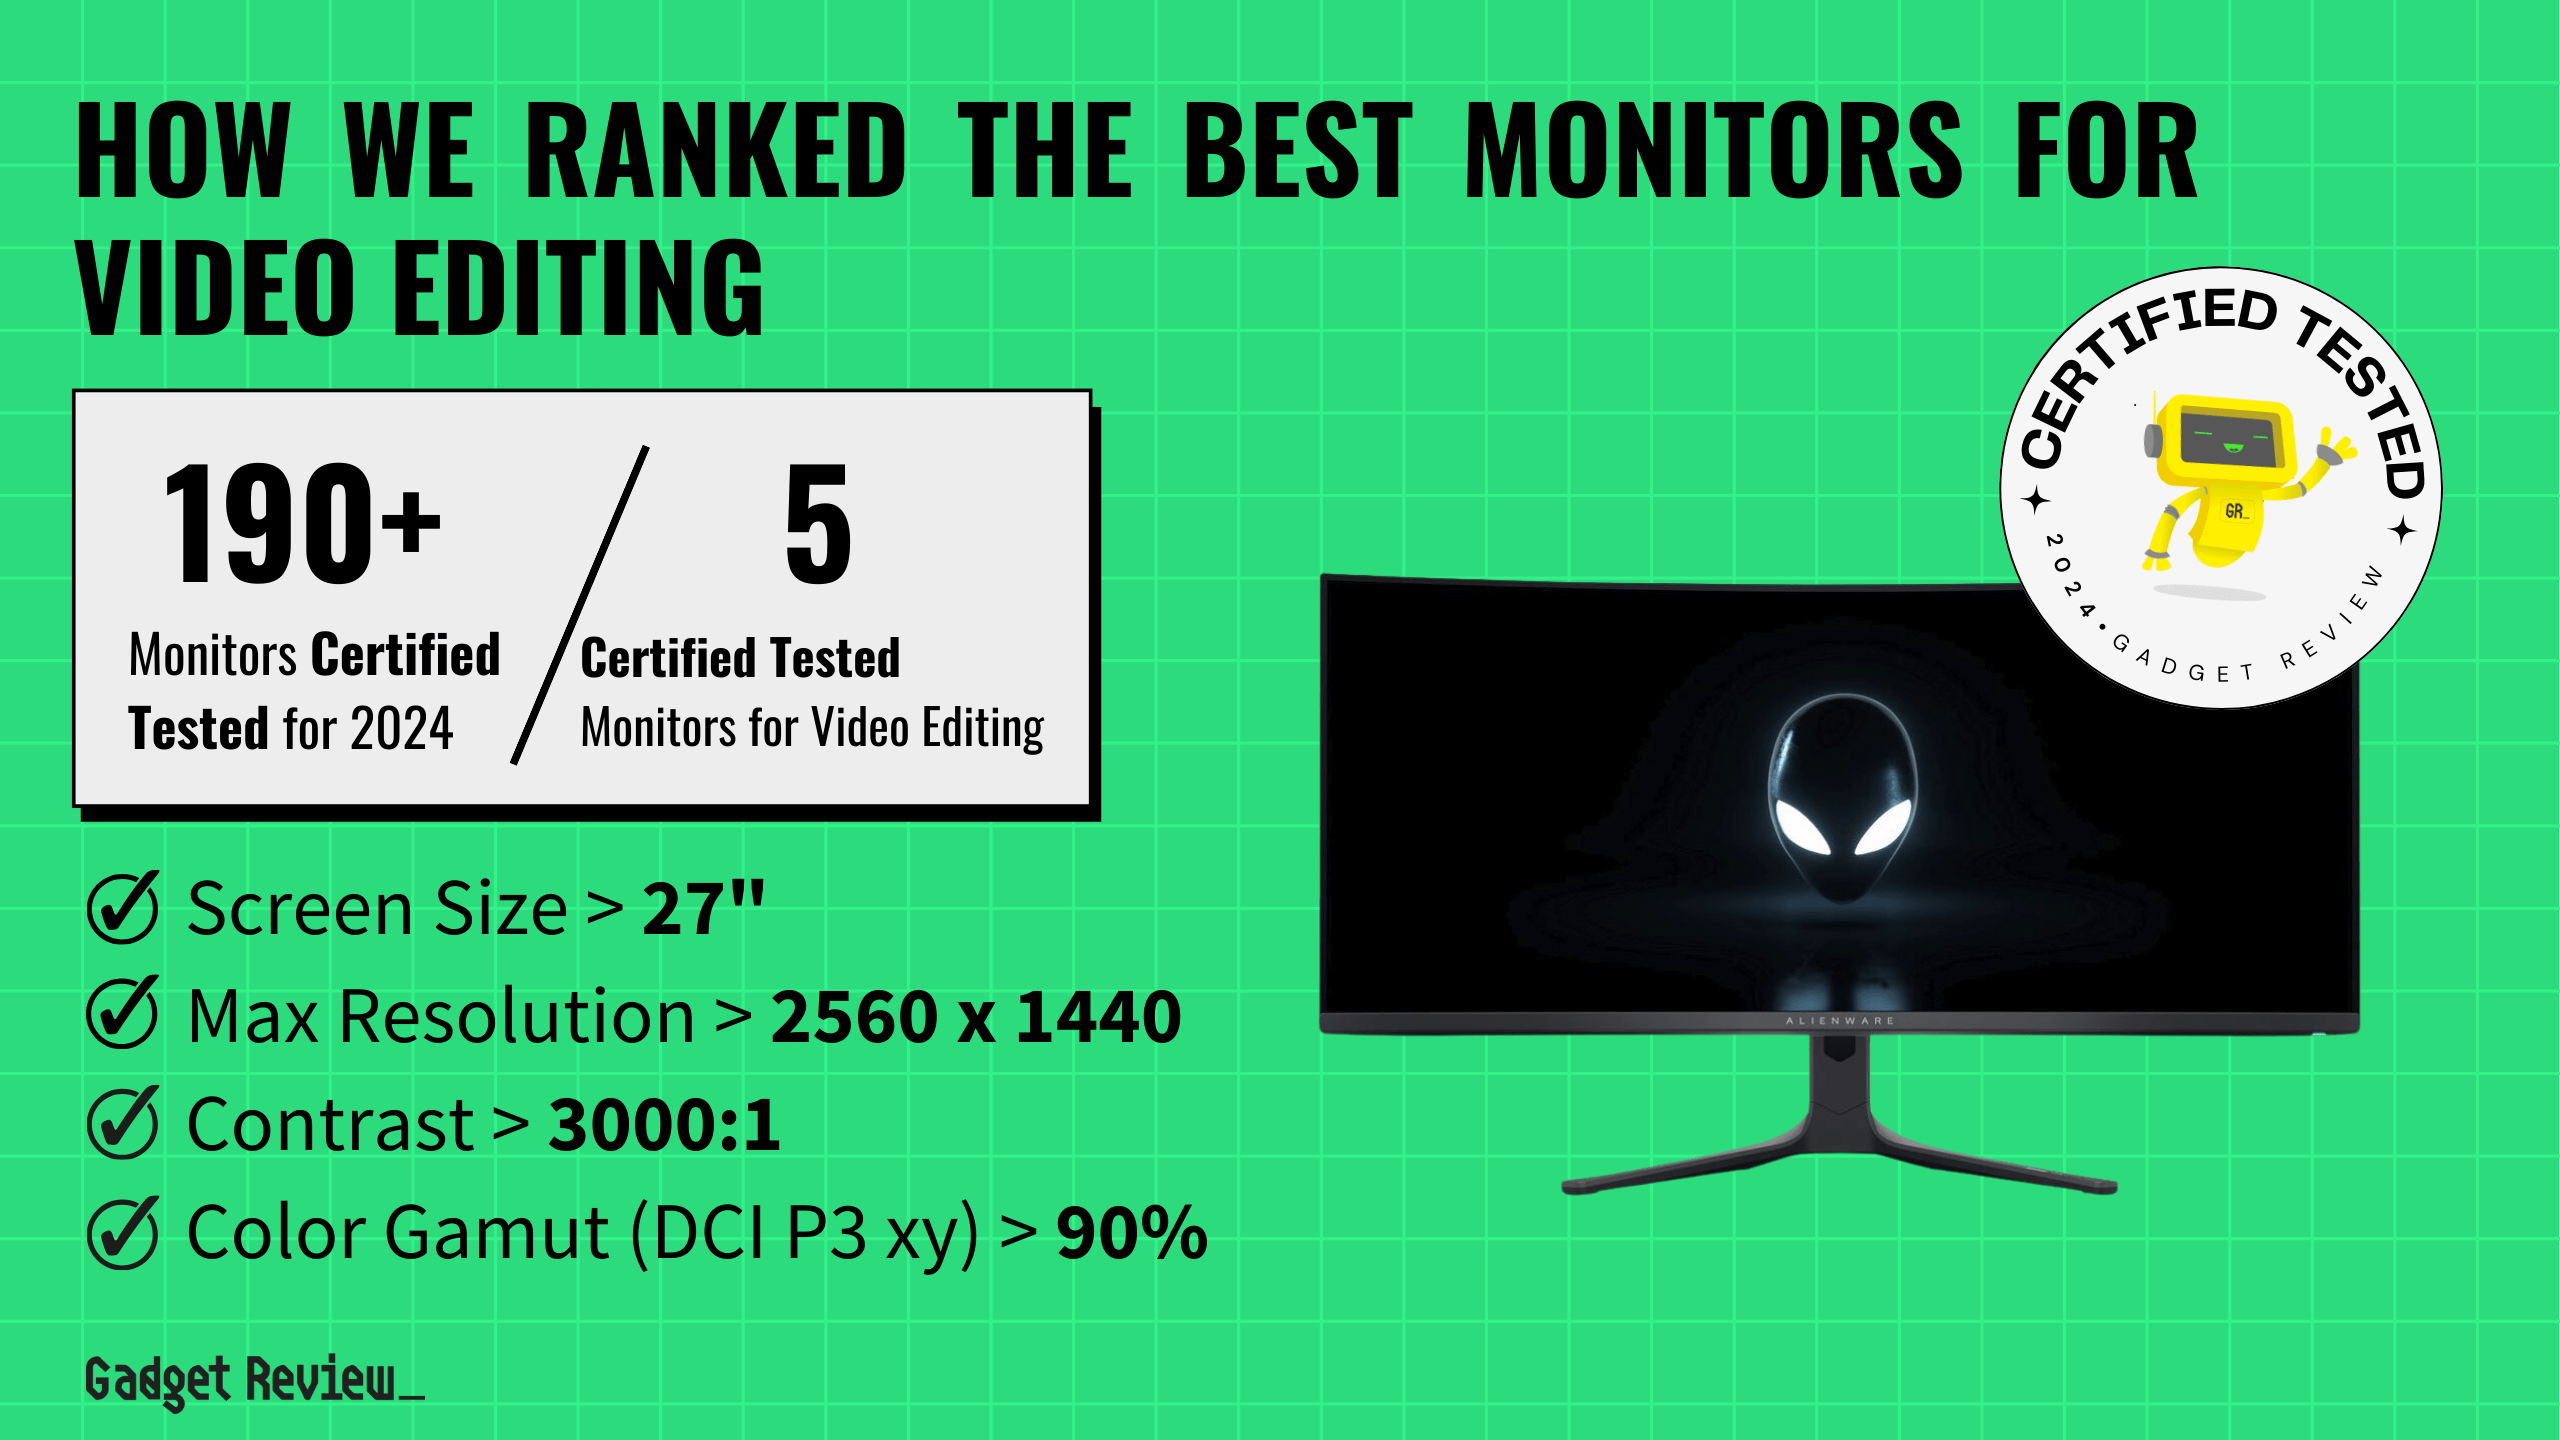 best monitor for video editing guide that shows the top best computer monitor model